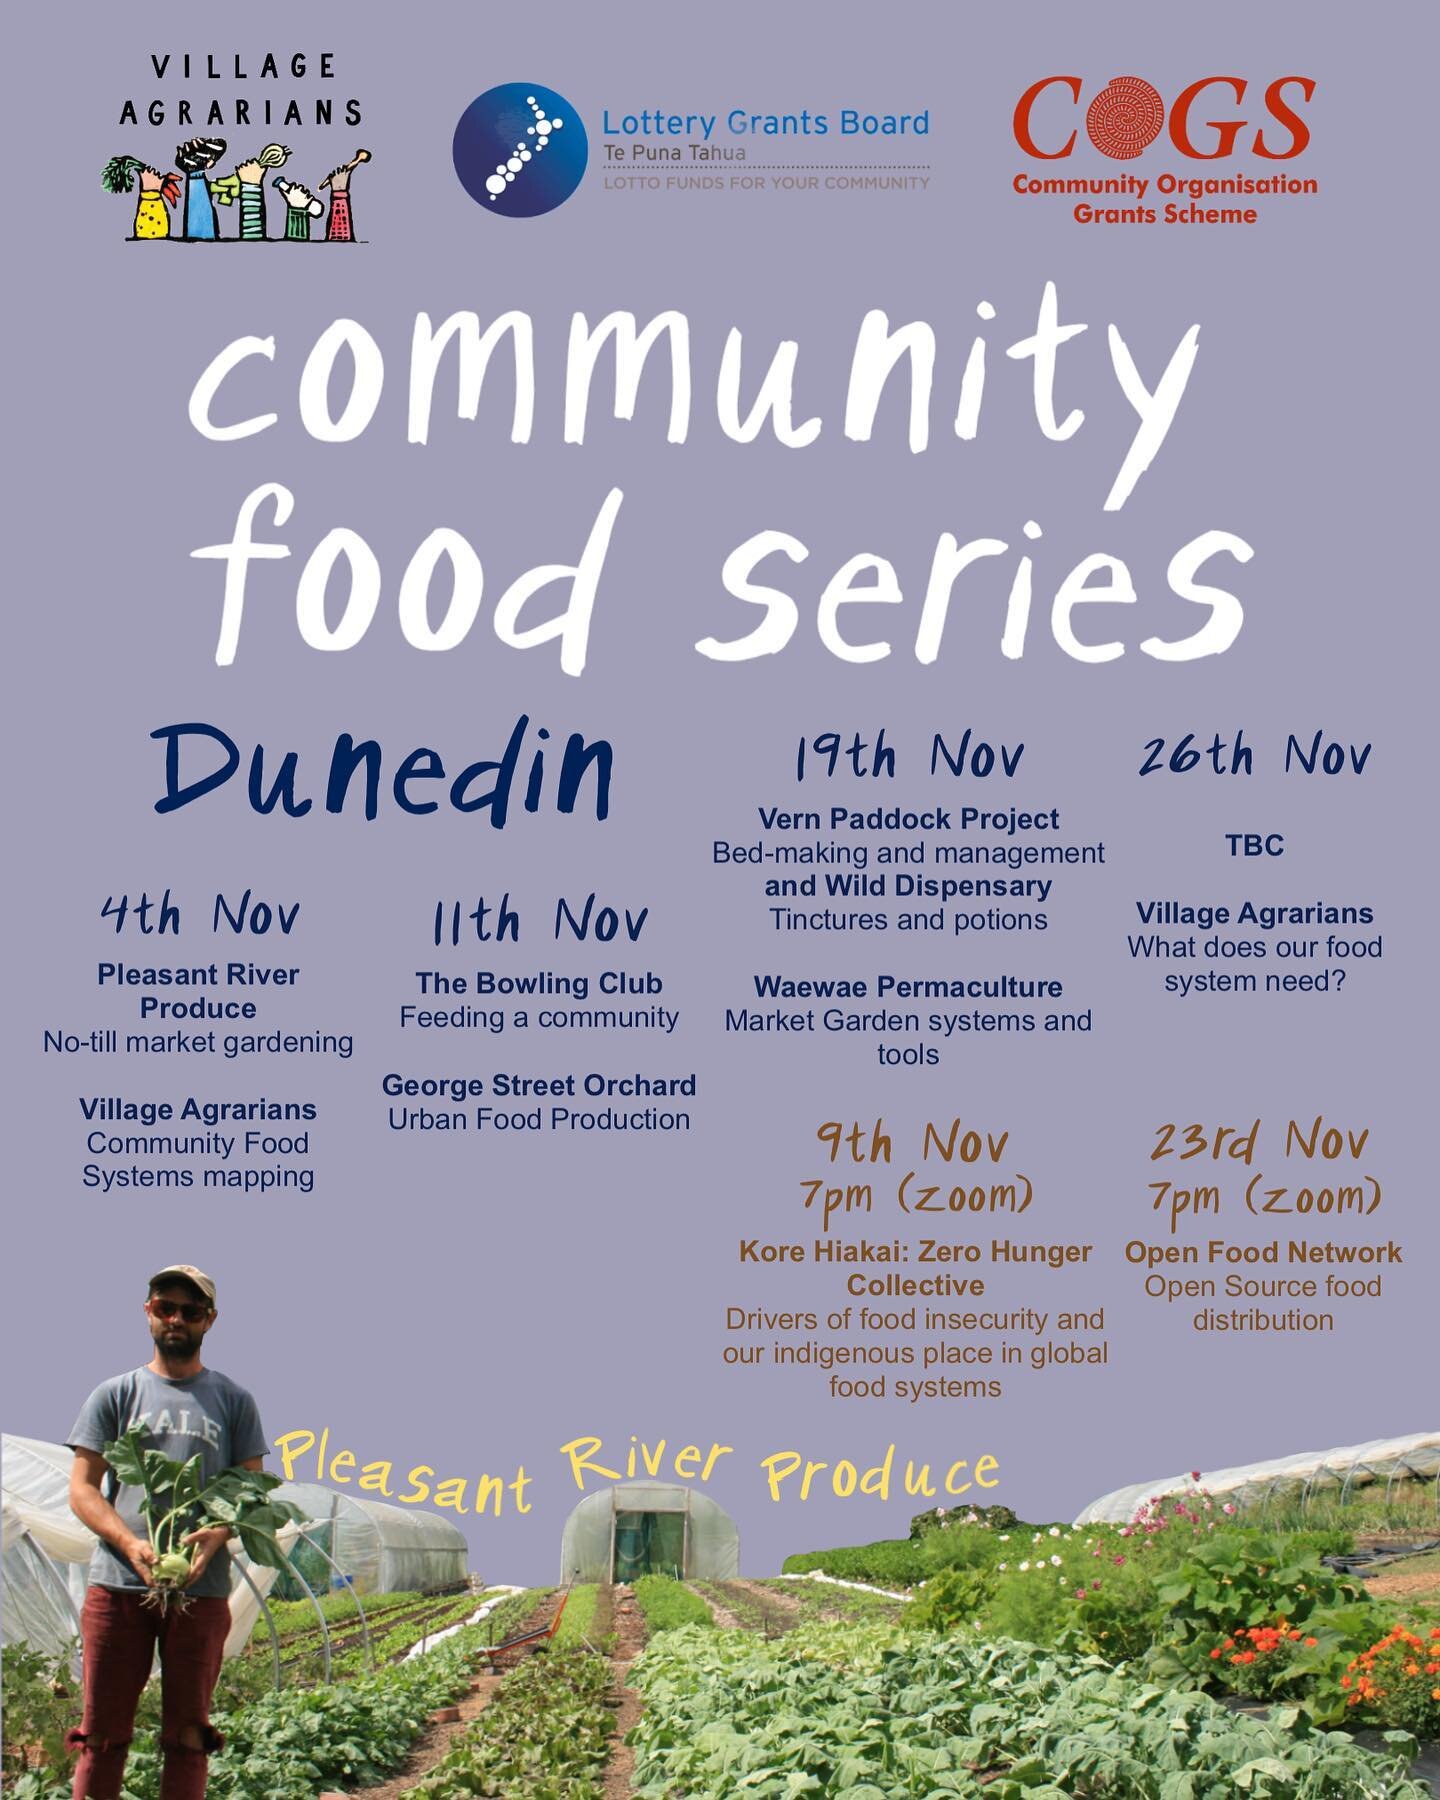 Dunedin folks! Our Community Food Series is just under two weeks away - sign up now for workshops, tours and discussions all about how we can have more good food! There are still spaces available! Link in bio to register!